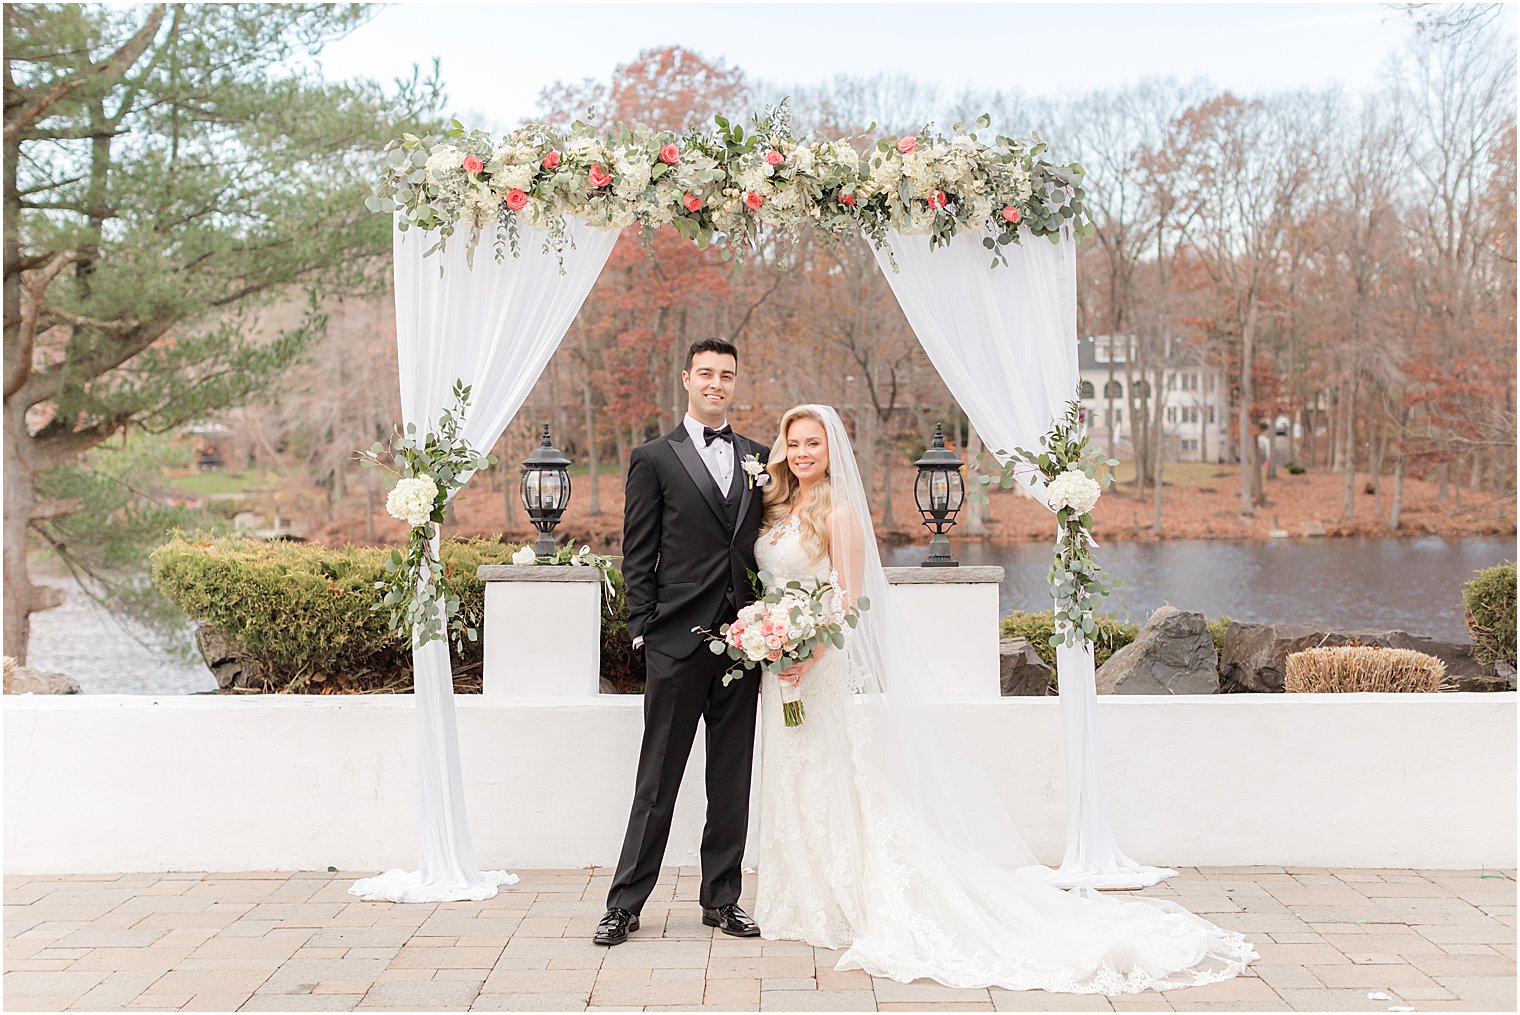 newlyweds pose under floral arbor on the patio at the Estate at Farmington Lake